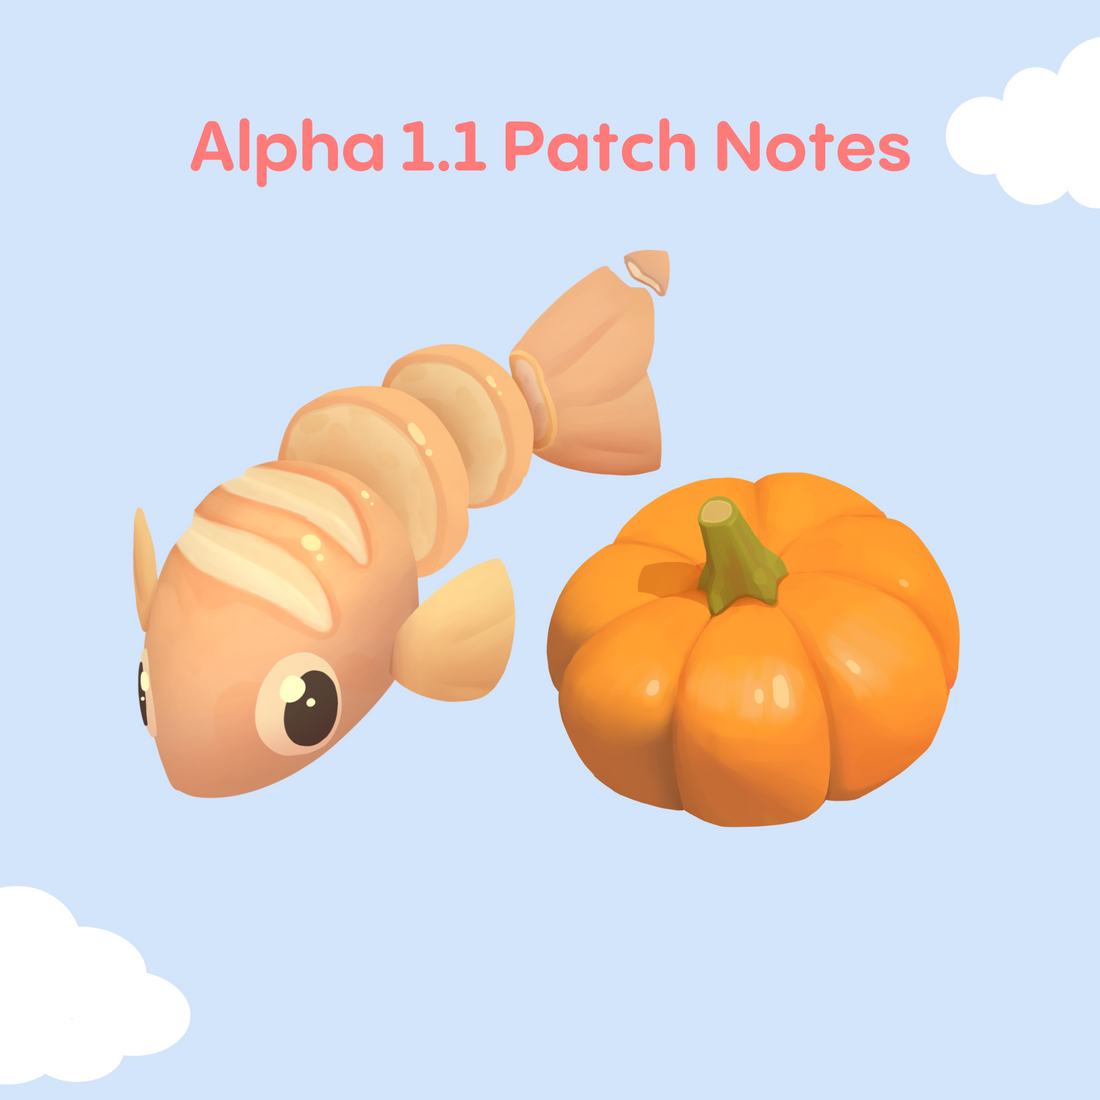 Alpha 1.1 Patch is coming! 📝✨